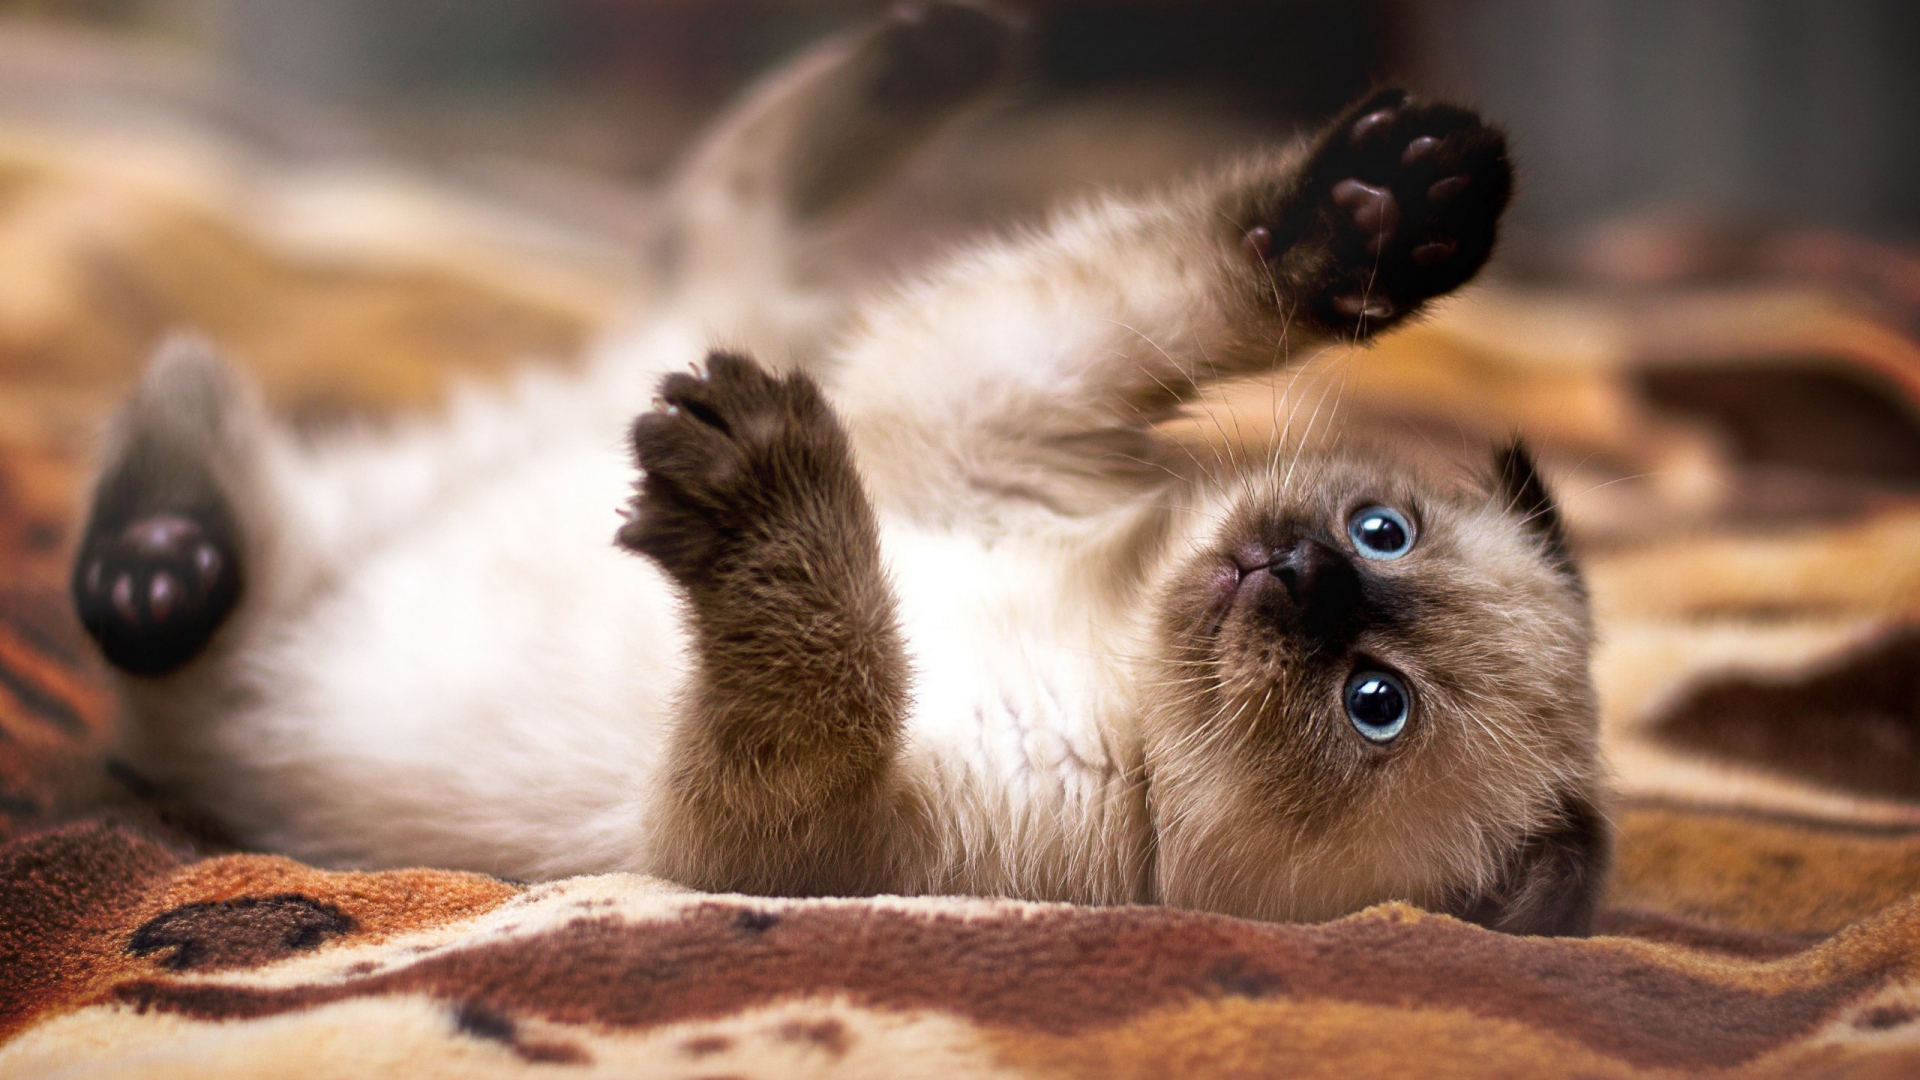 Siamese baby cat for 1920 x 1080 HDTV 1080p resolution